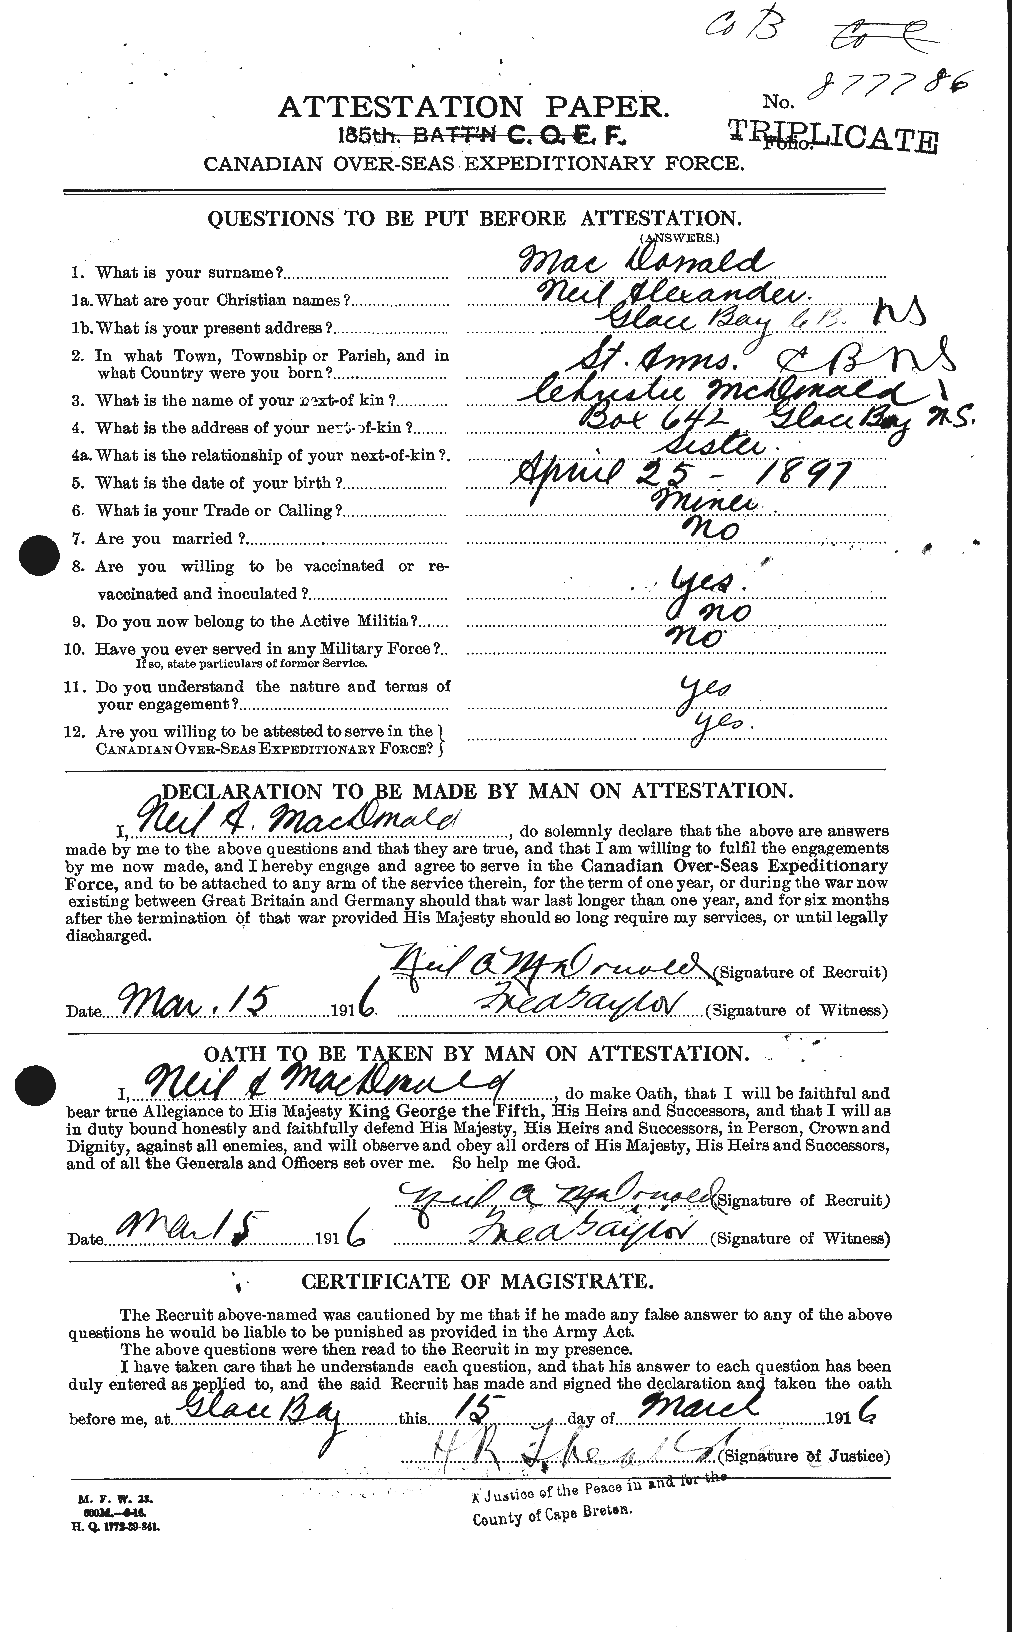 Personnel Records of the First World War - CEF 524521a